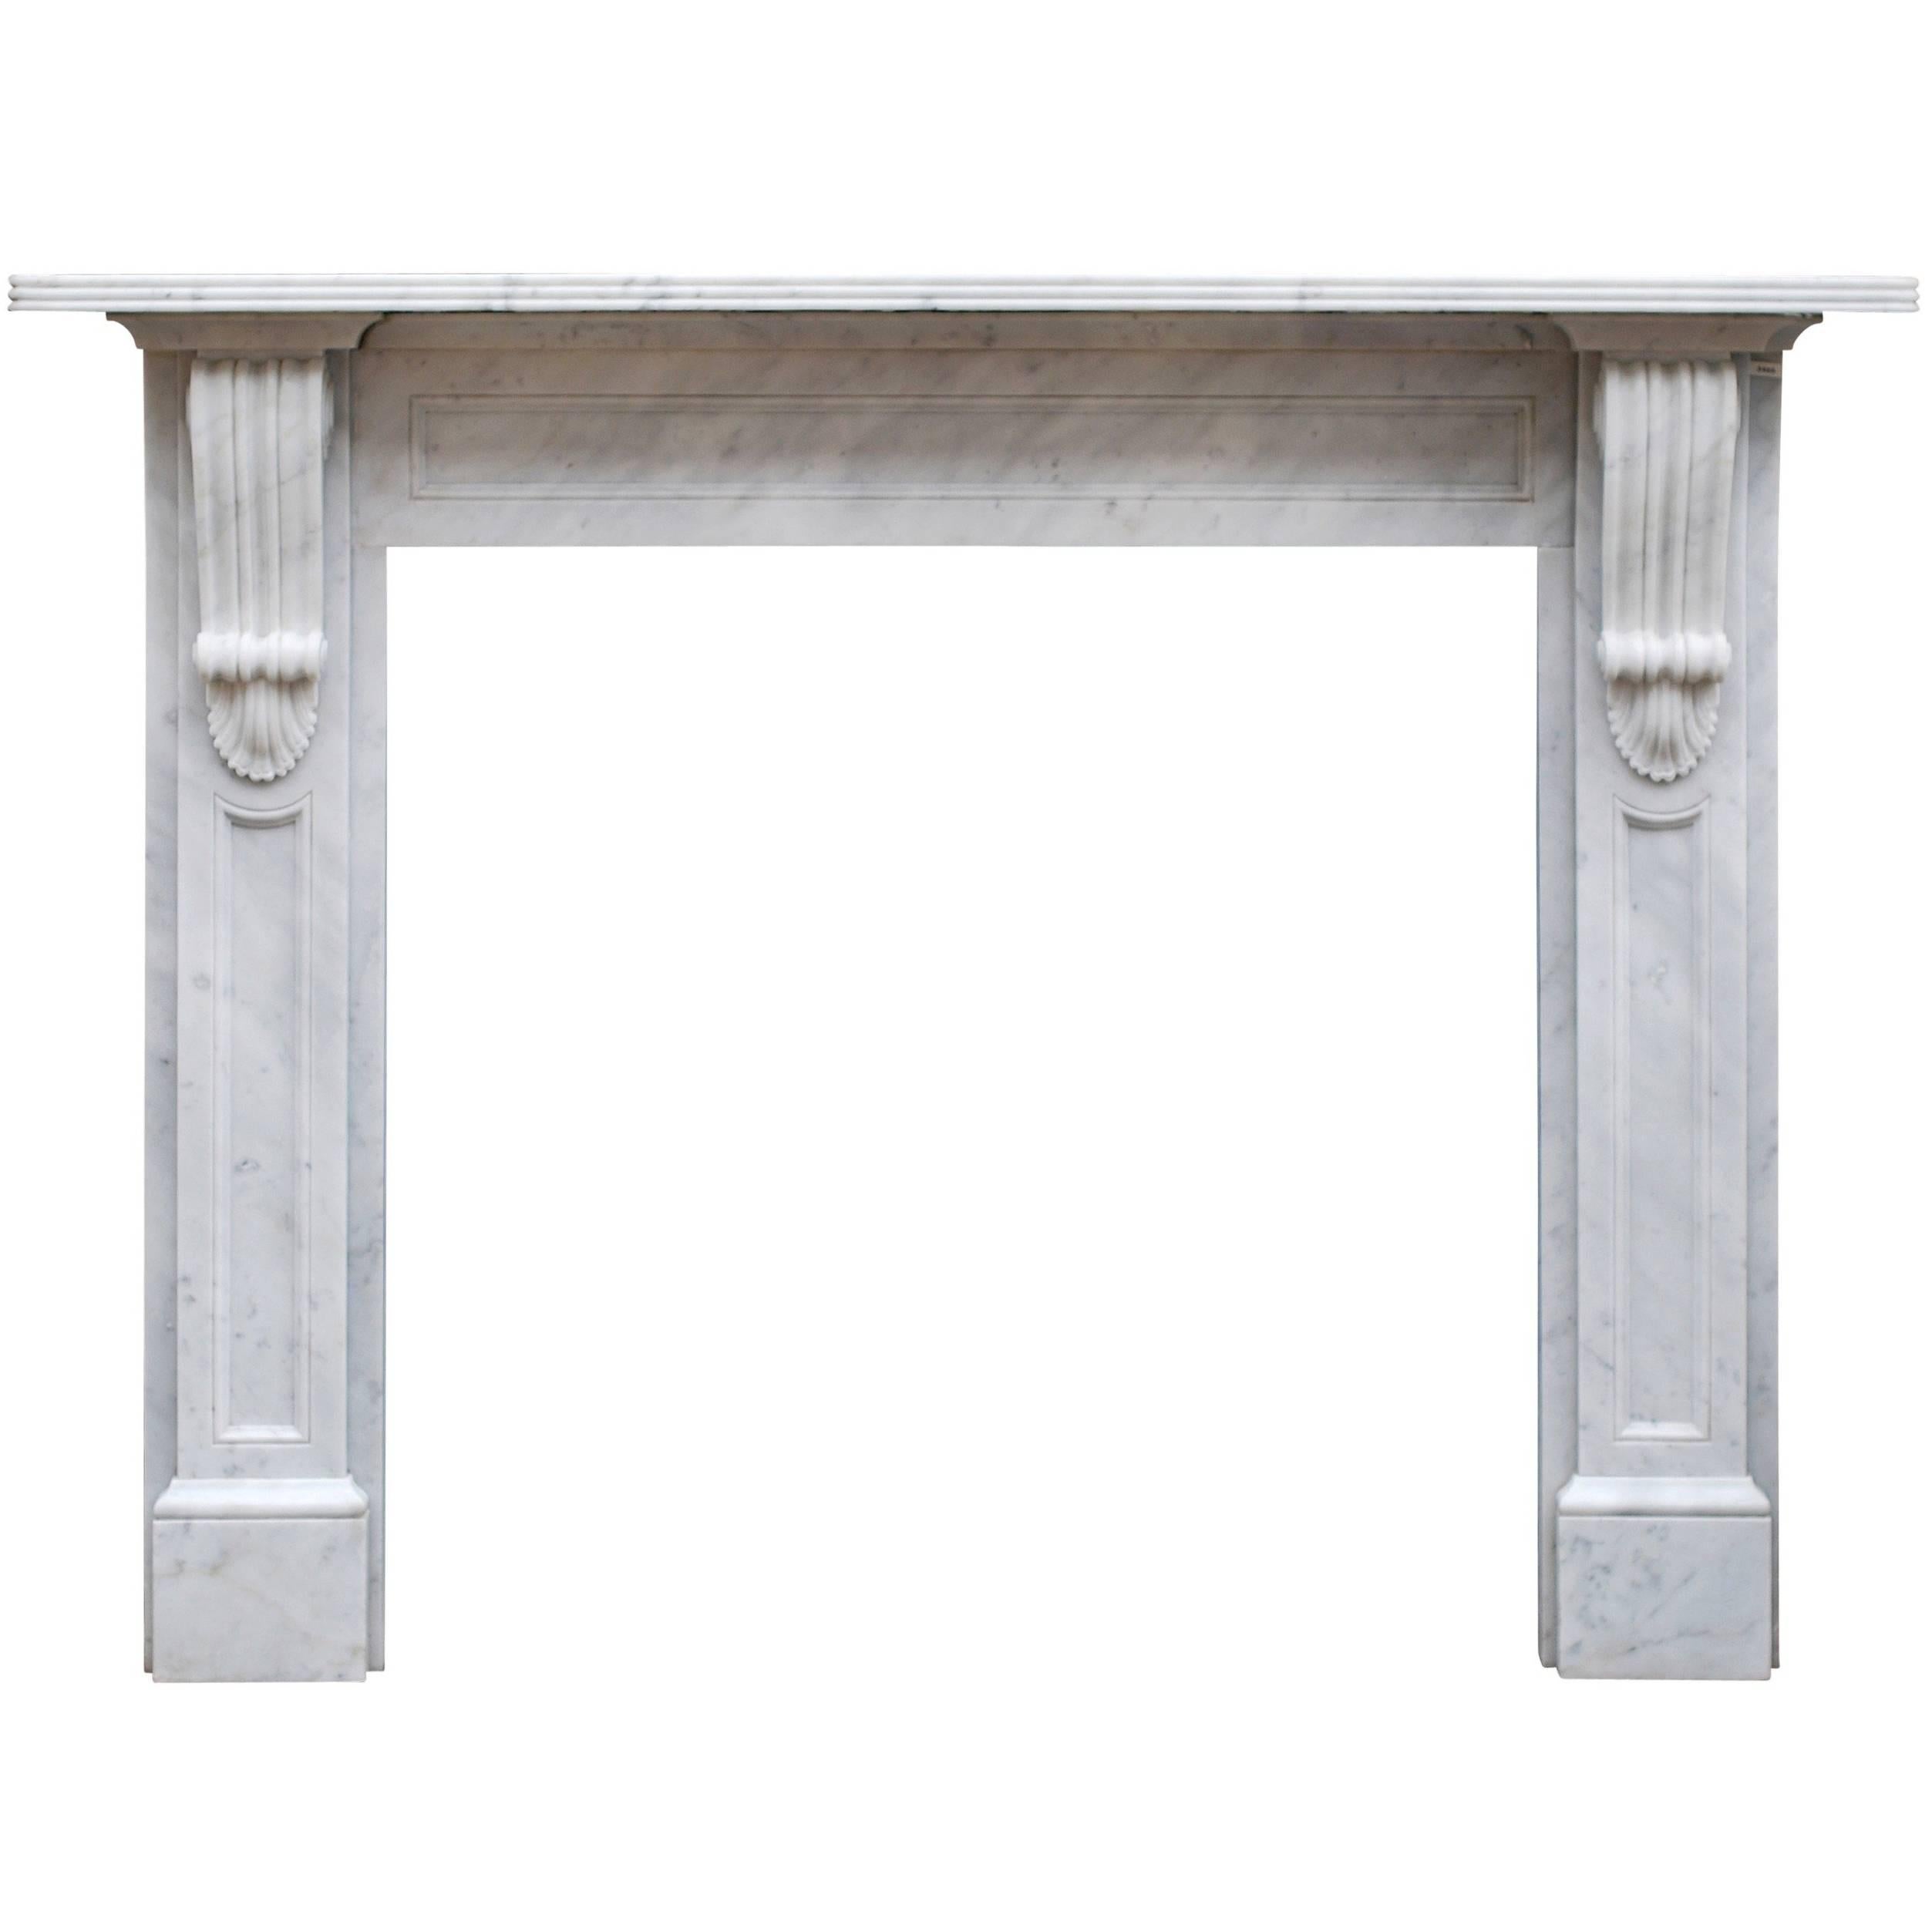 Reproduction Victorian Fireplace in White Marble